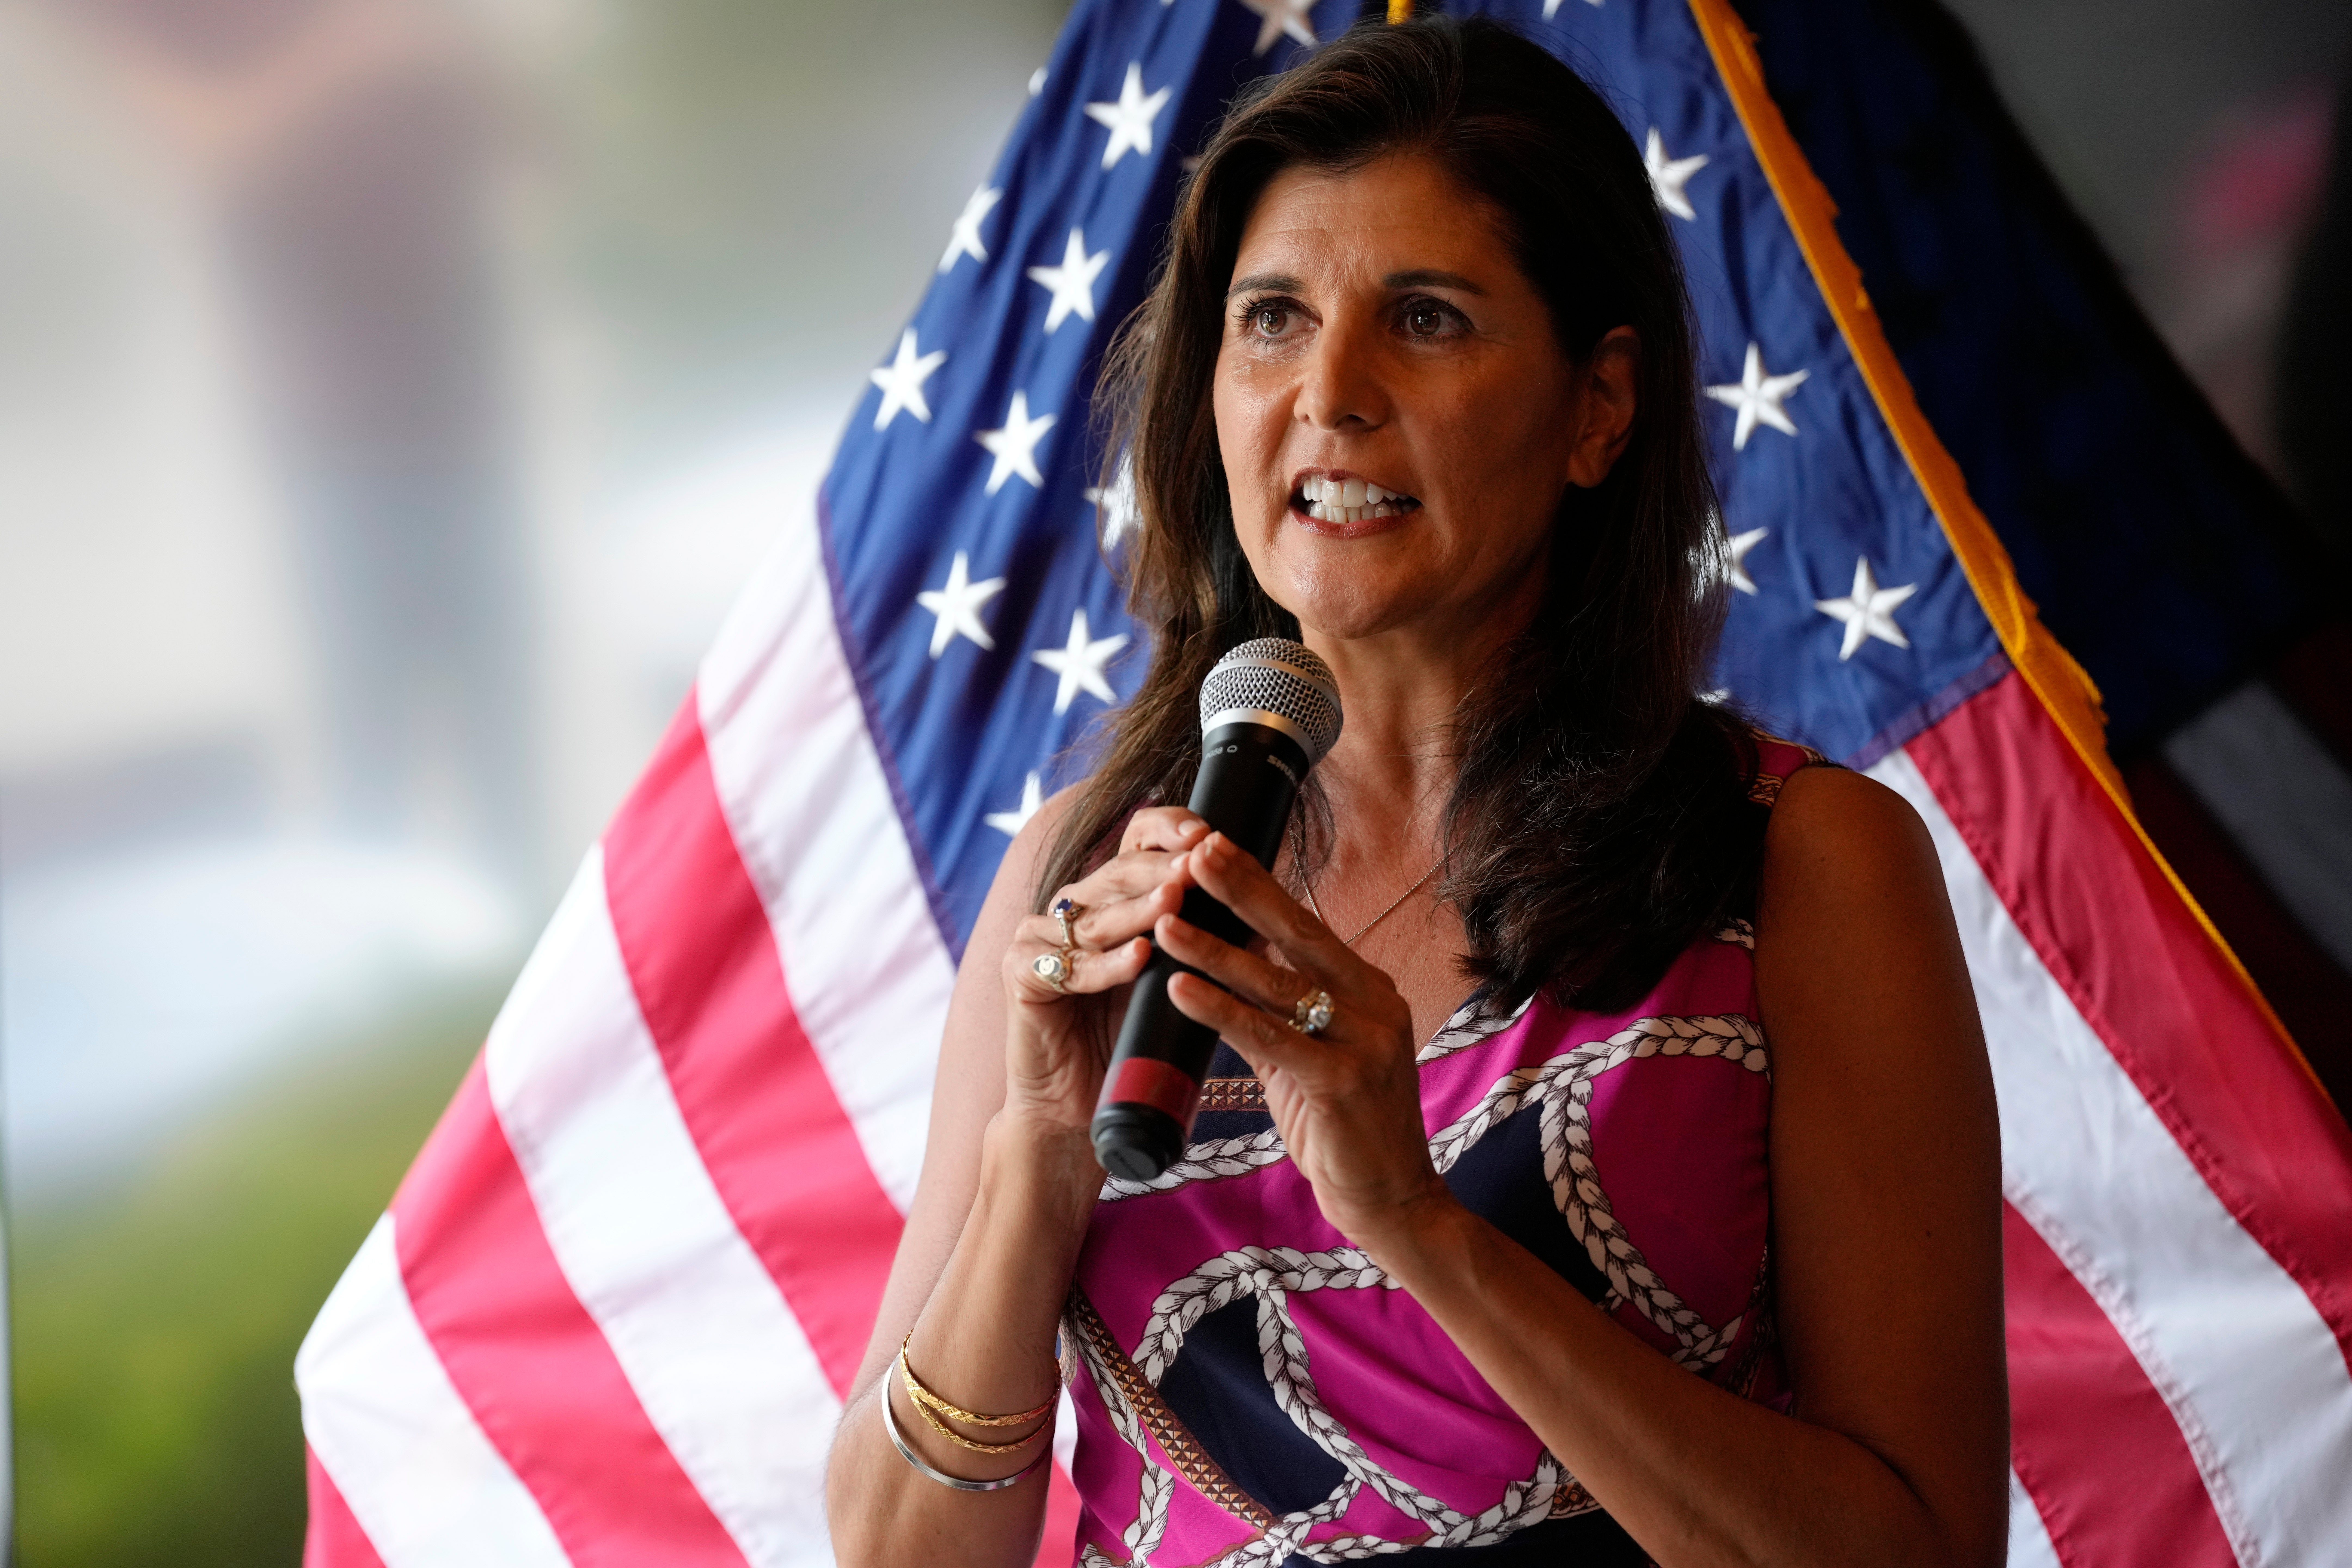 Nikki Haley is expected to be among those seeking Republican nomination in 2024